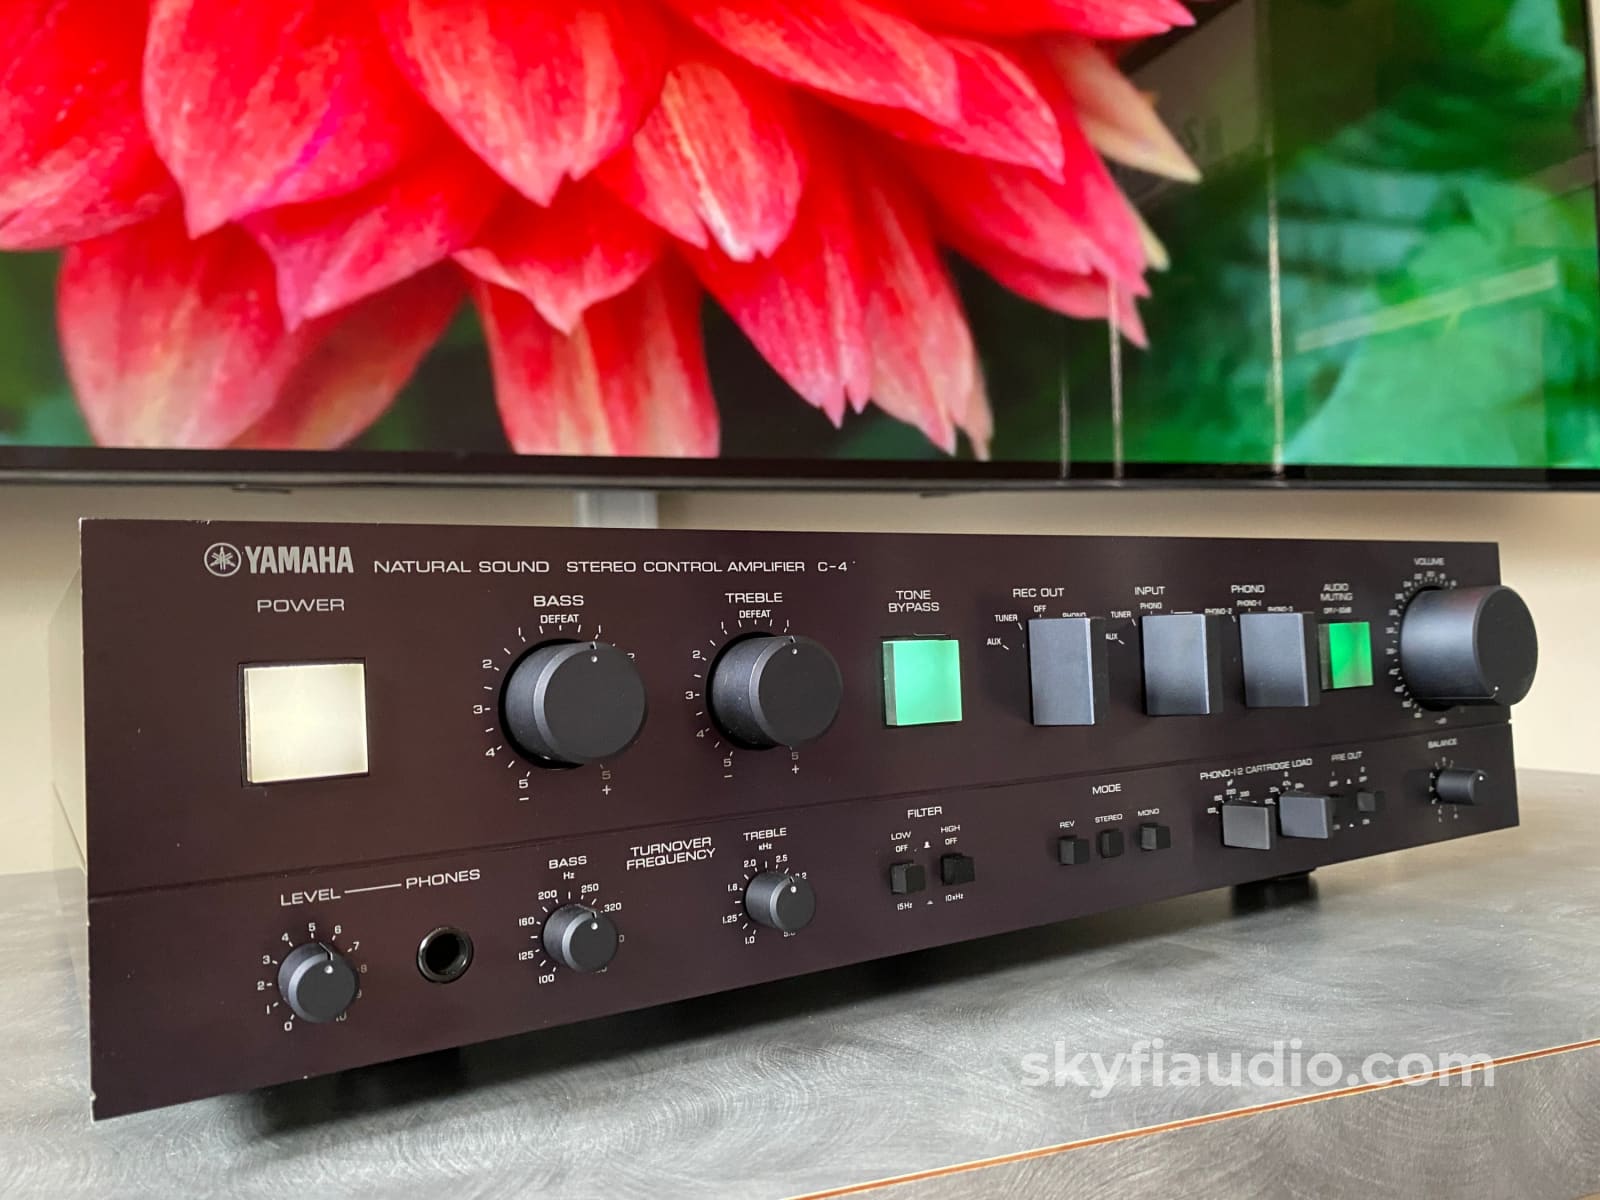 Yamaha C-4 Preamplifier - Serviced And Upgraded Vinyl Lovers Dream Phono Preamp